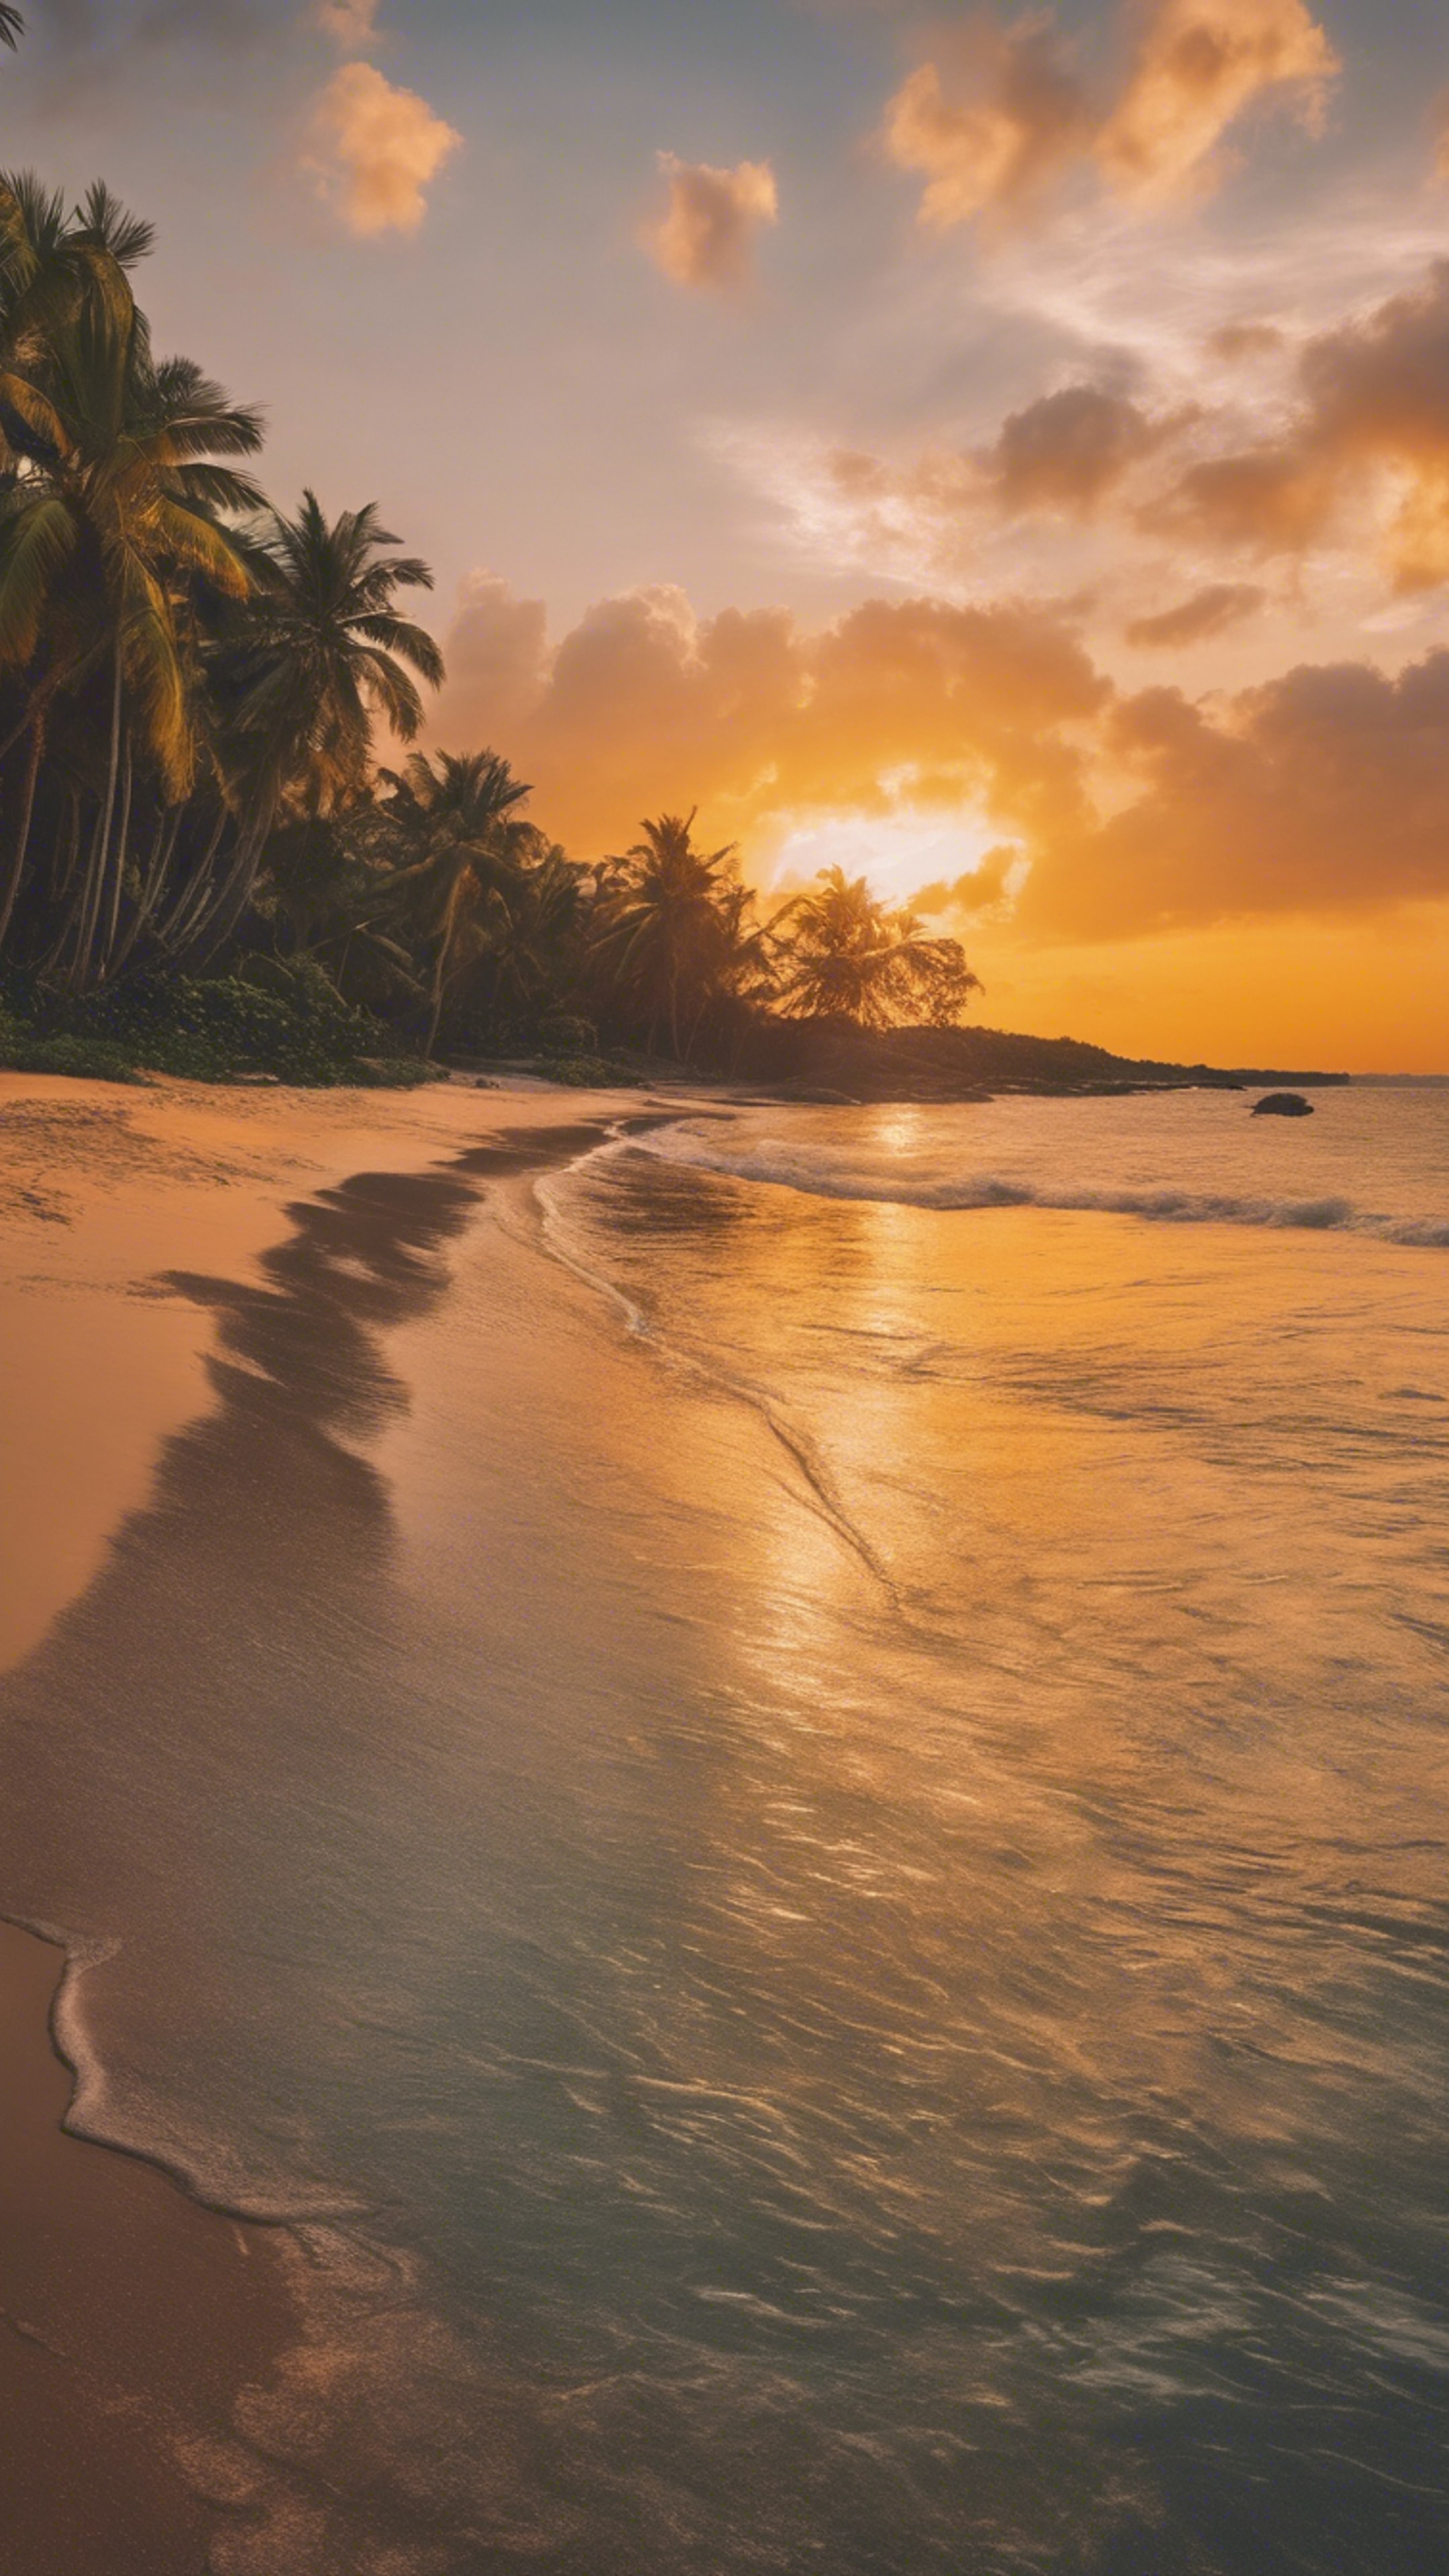 A tropical beach at sunset with hues of orange and yellow gently reflecting on the clear water. Tapeta[f1cd0a05f1594f21a6bf]